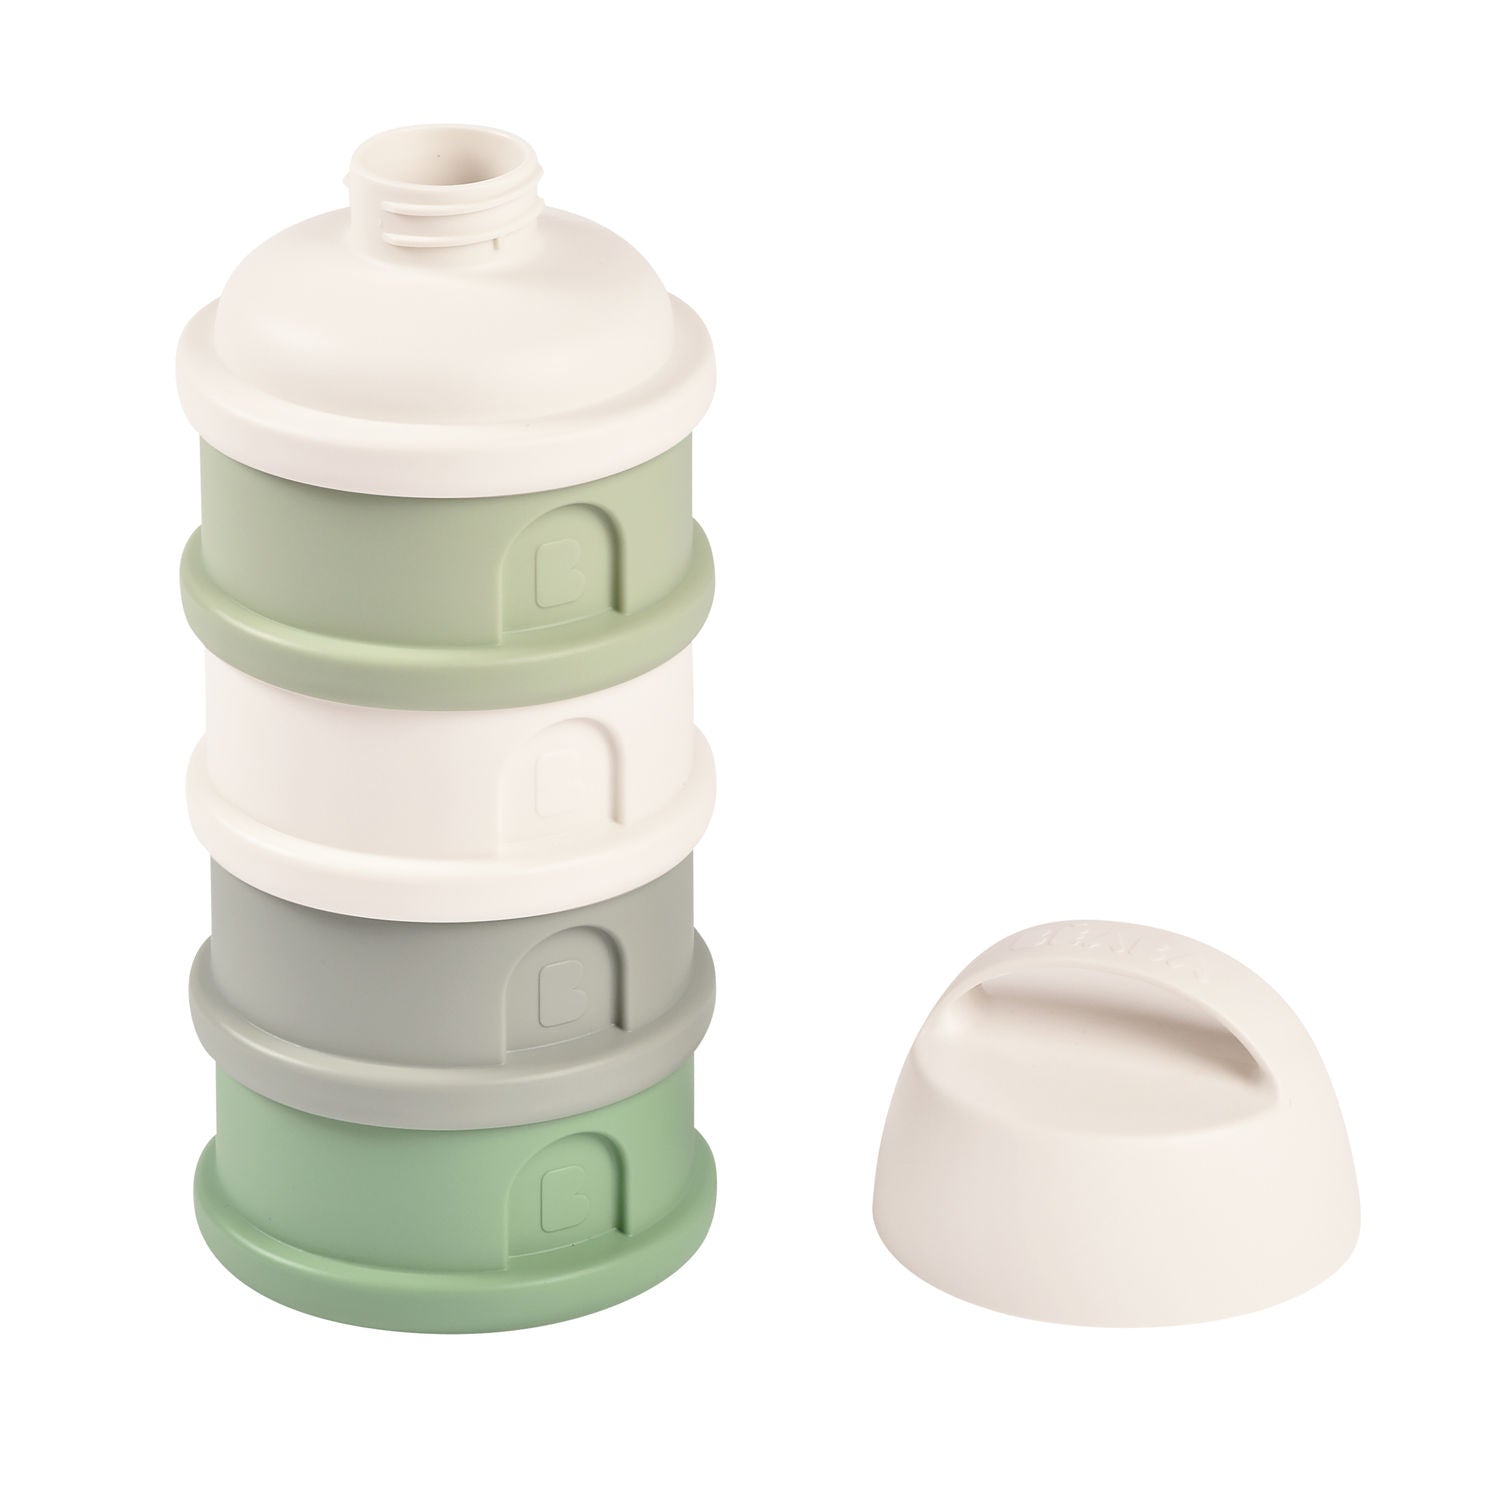 Beaba Formula And Snack Container - Sage - Tiny Tots Baby Store 